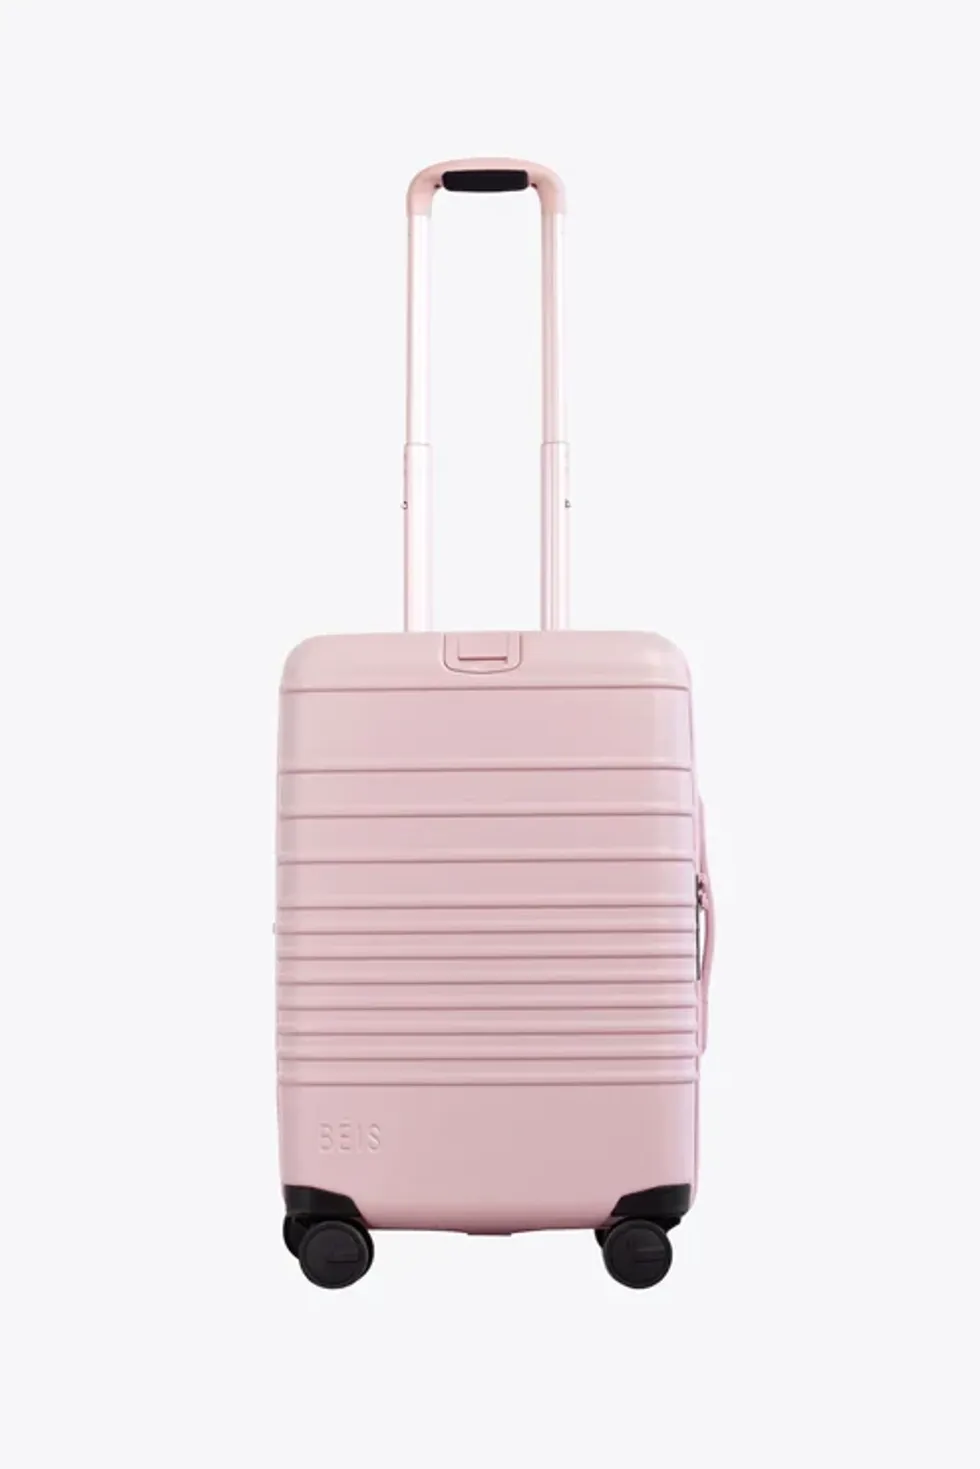 small rolling suitcases